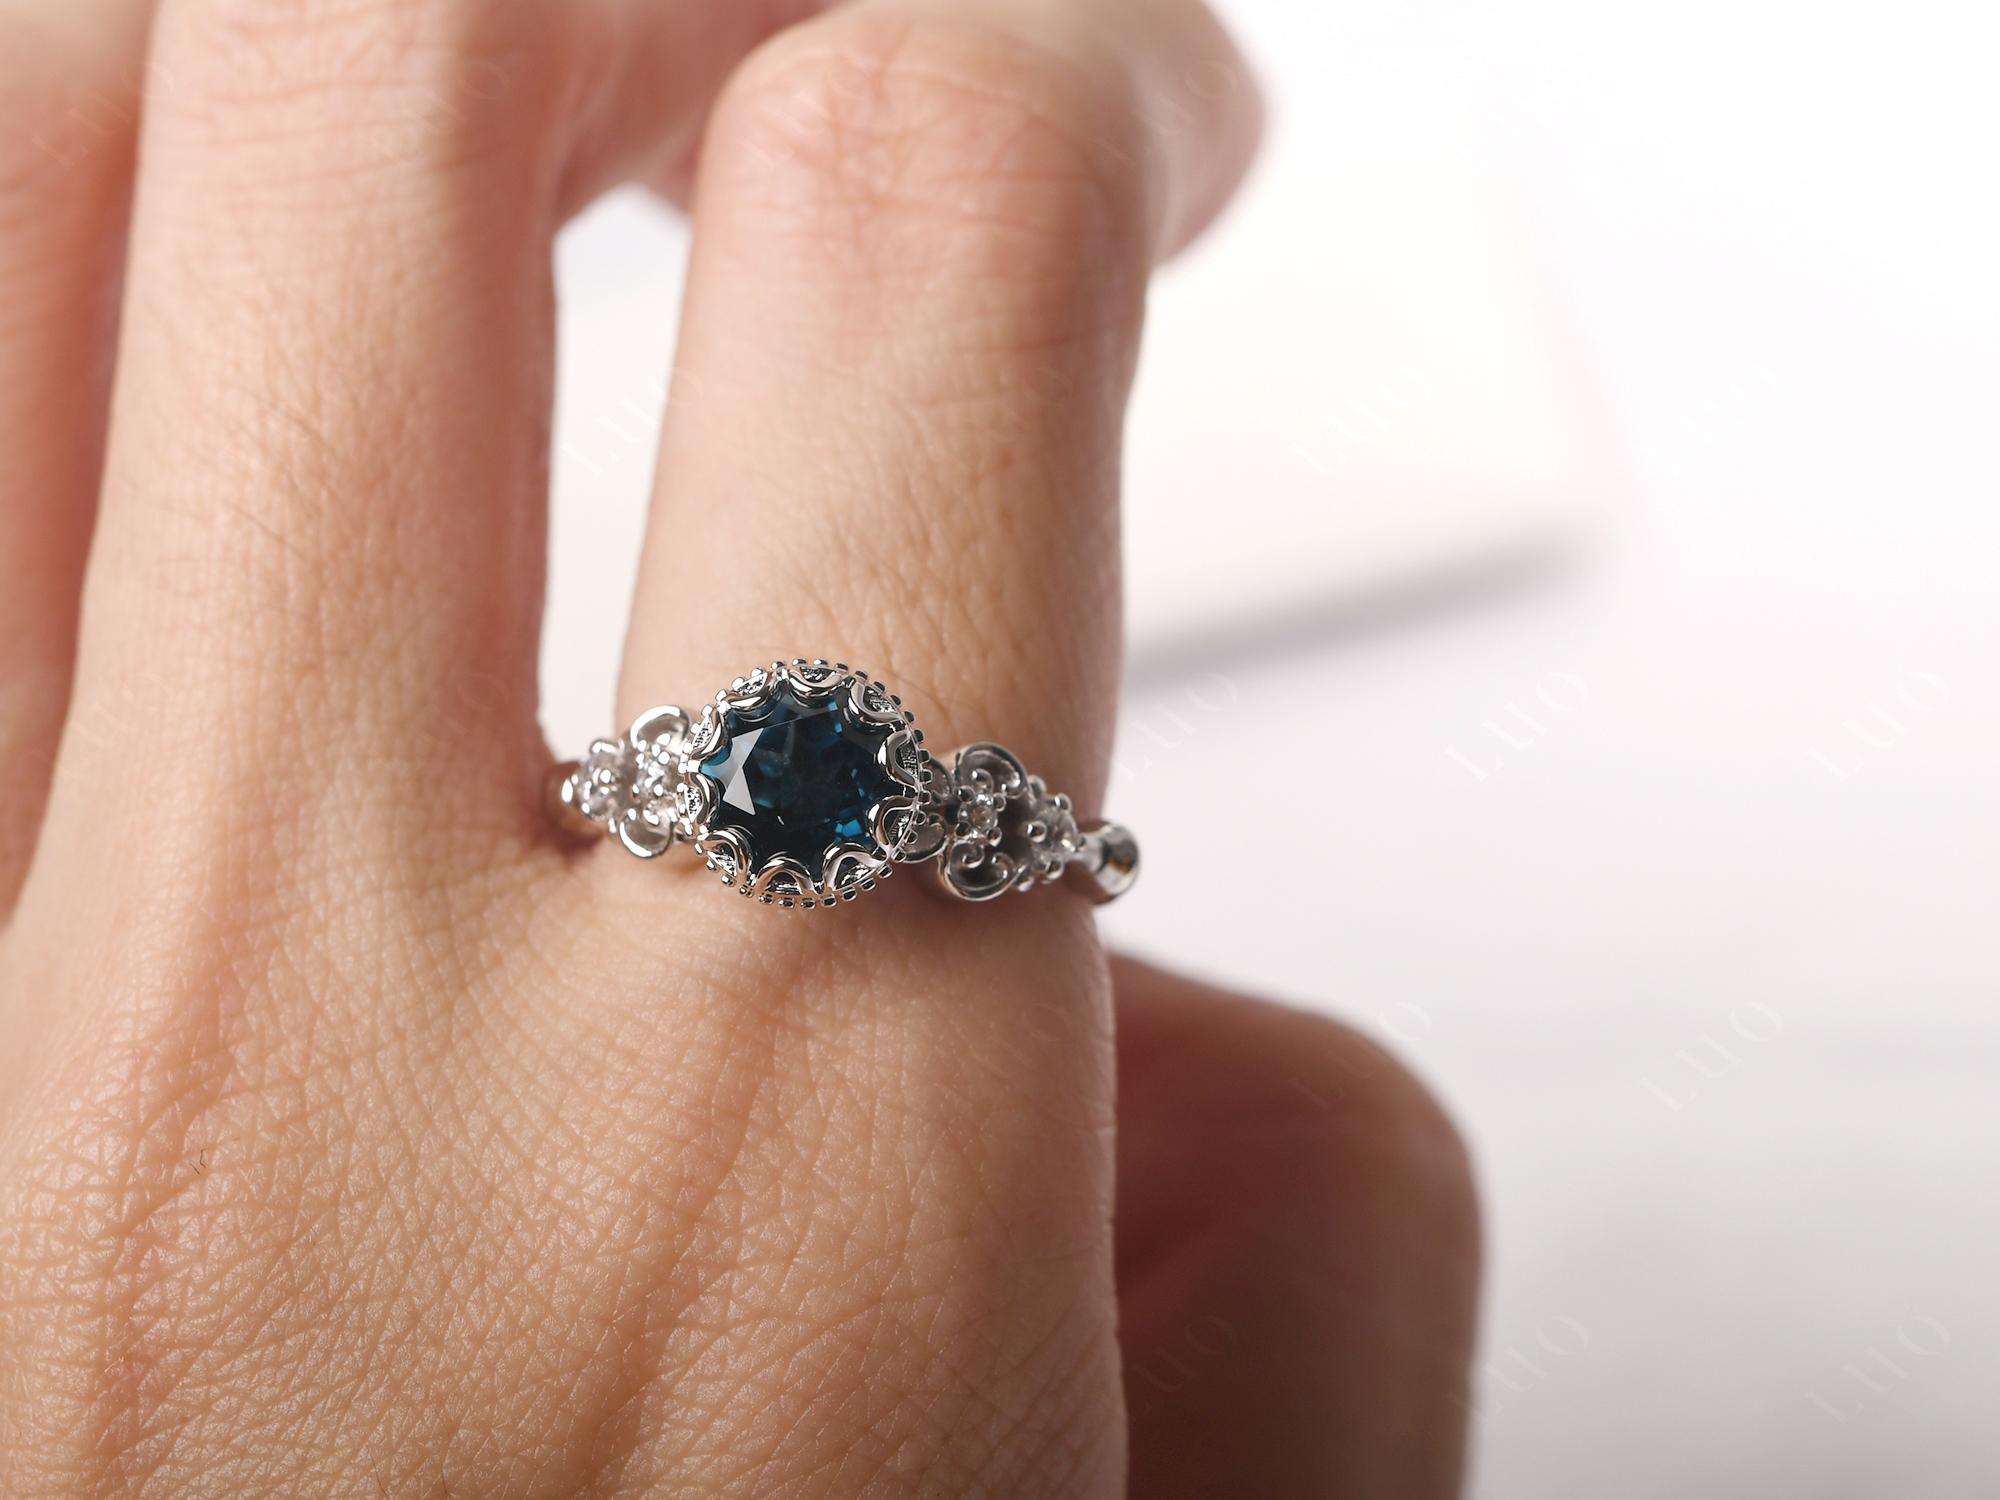 Art Deco Vintage Inspired London Blue Topaz Ring - LUO Jewelry